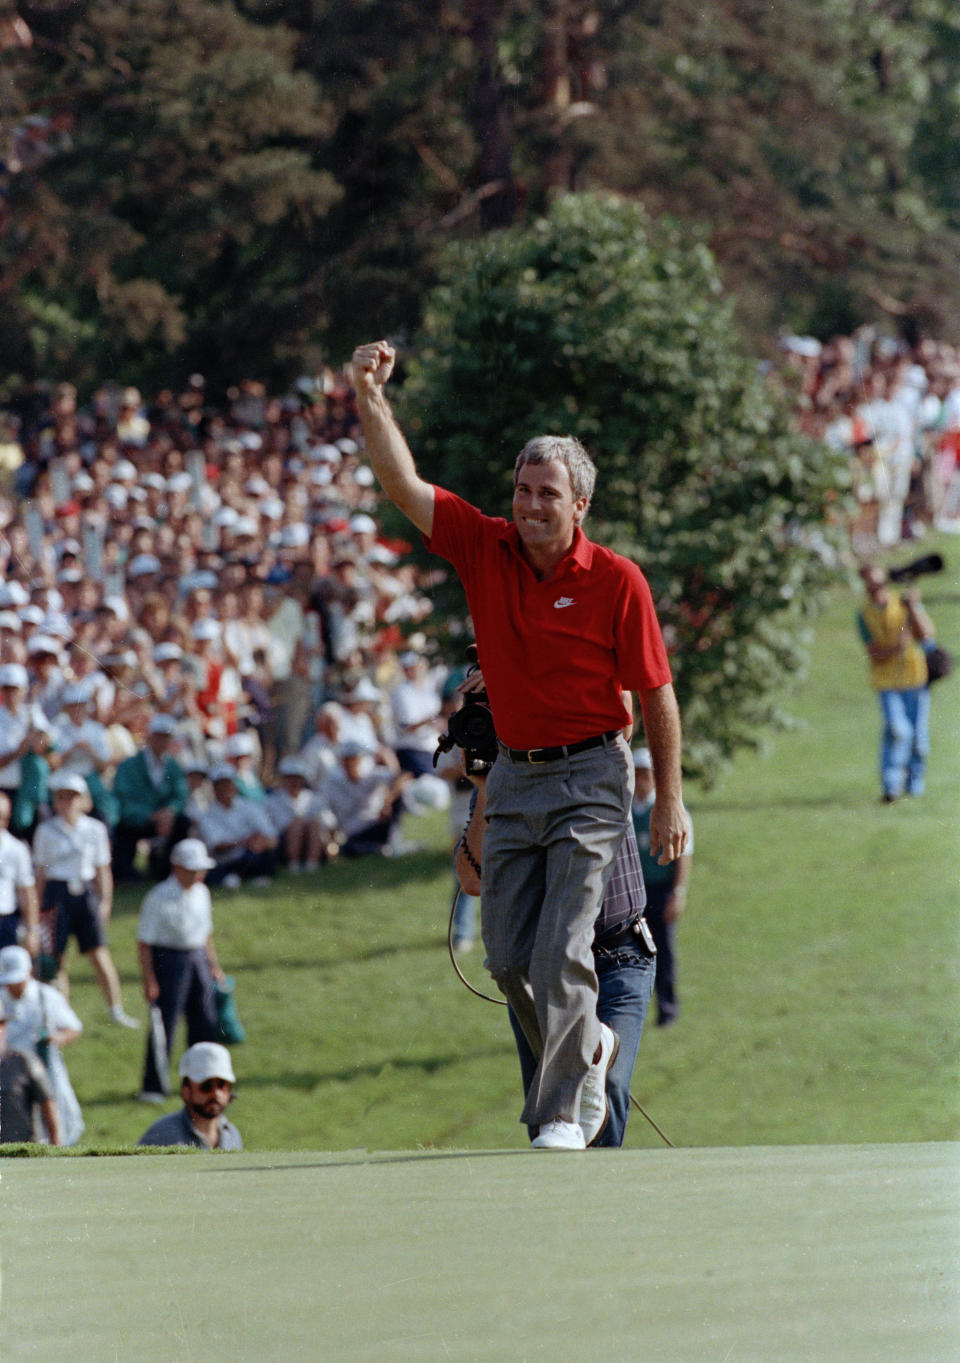 FILE- Curtis Strange reaches the 18th green waving to the crowd as he is about to win the U.S. Open for the second straight year, June 18, 1989, at the Oak Hill Country Club in Rochester, N.Y. Strange returns to Oak Hill for the PGA Championship on May 18-21 as part of the ESPN broadcast team. (AP Photo/Tom Kilips)